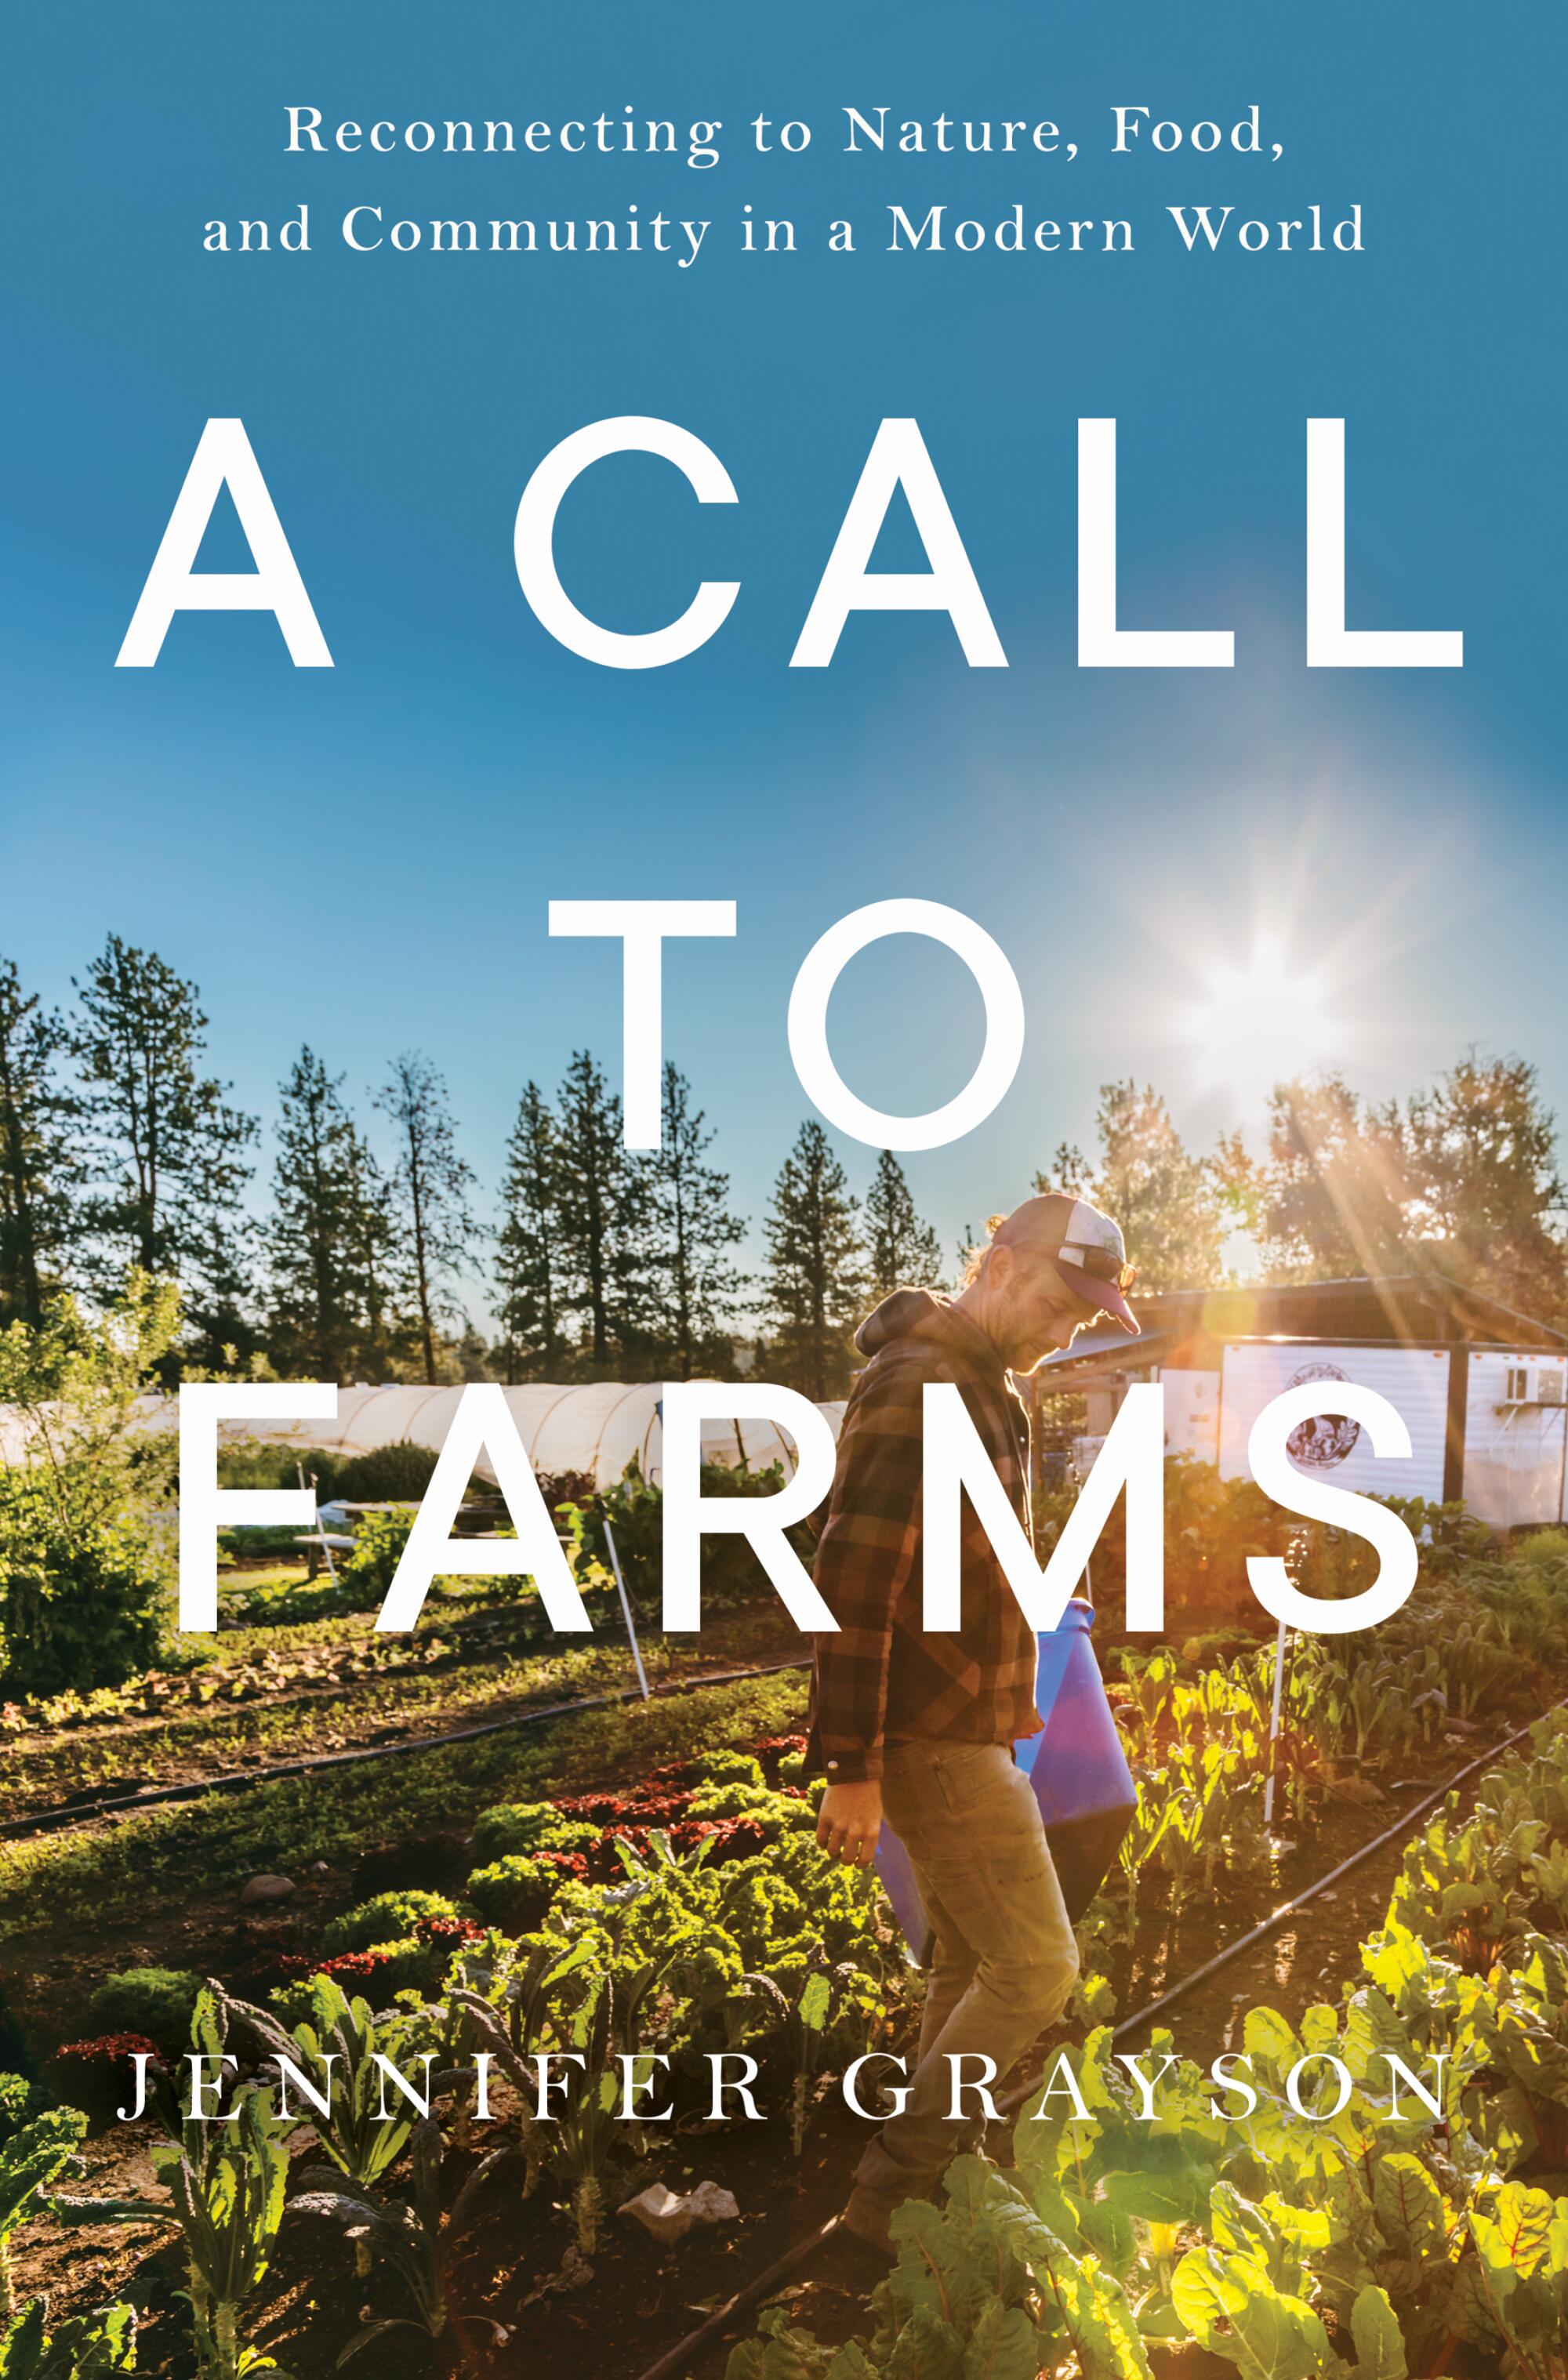 "A Call to Farms" cover art for book review